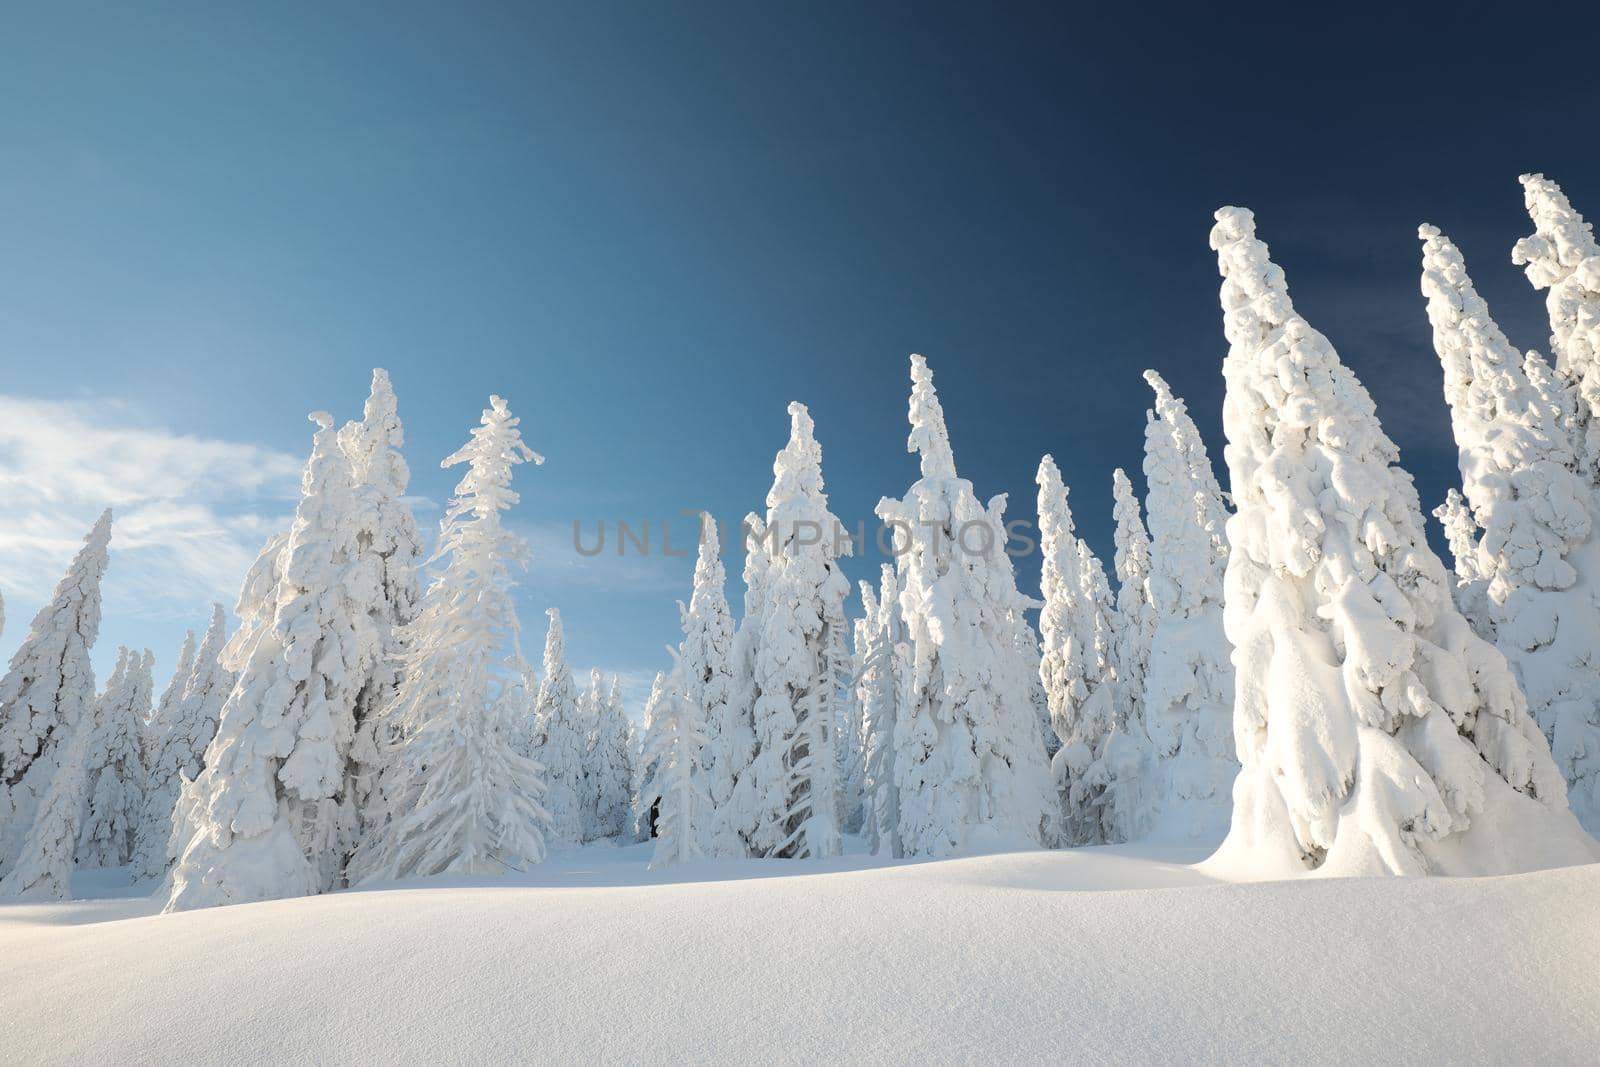 Spruce trees covered with snow on the mountain top at sunset.